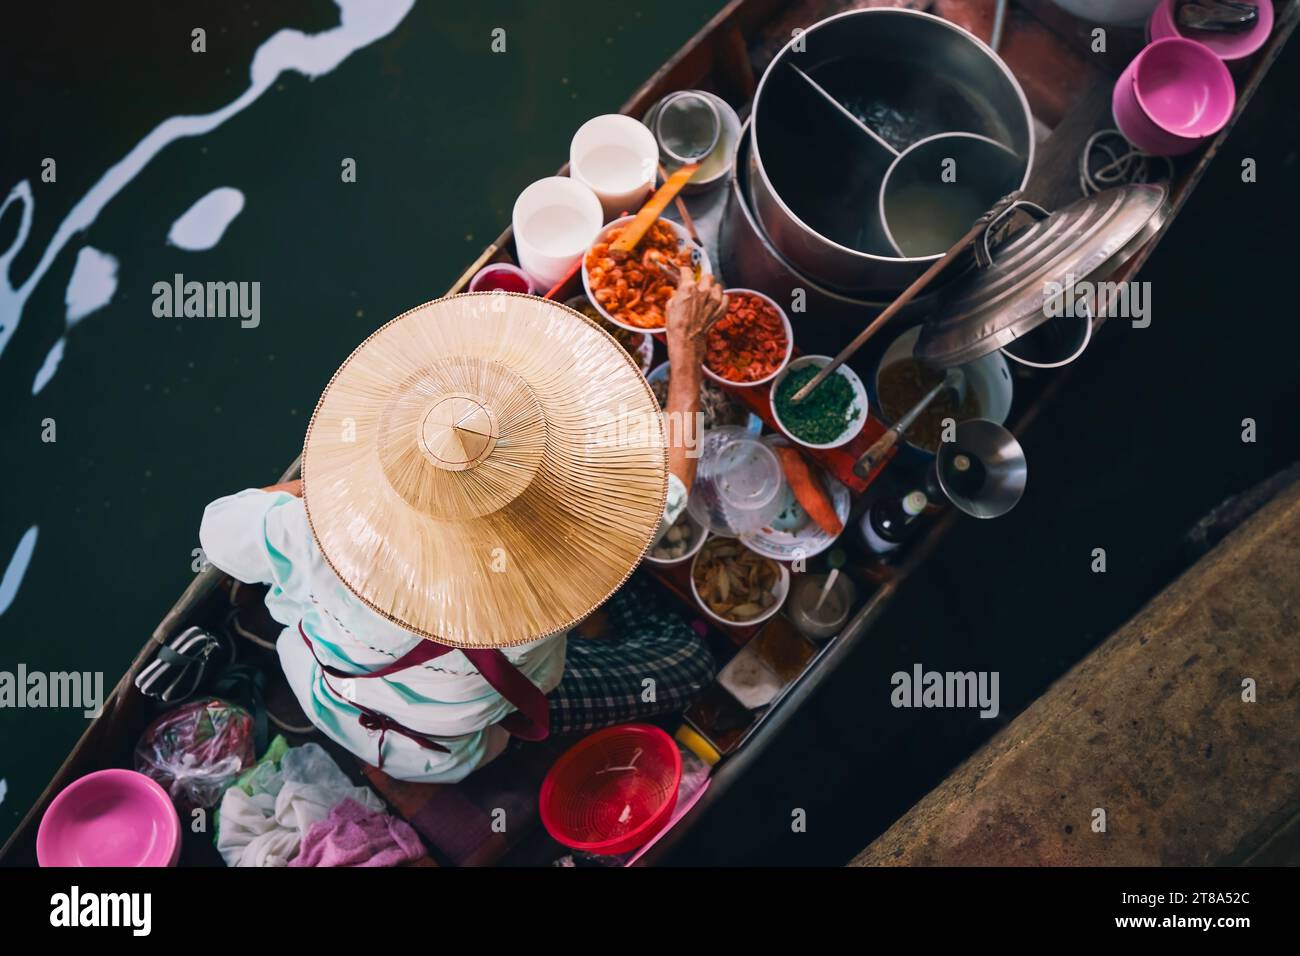 Selective focus on traditional hat of vendor on boat on floating market. Woman is preparing food on water in Damnoen Saduak near Bangkok, Thailand. Stock Photo